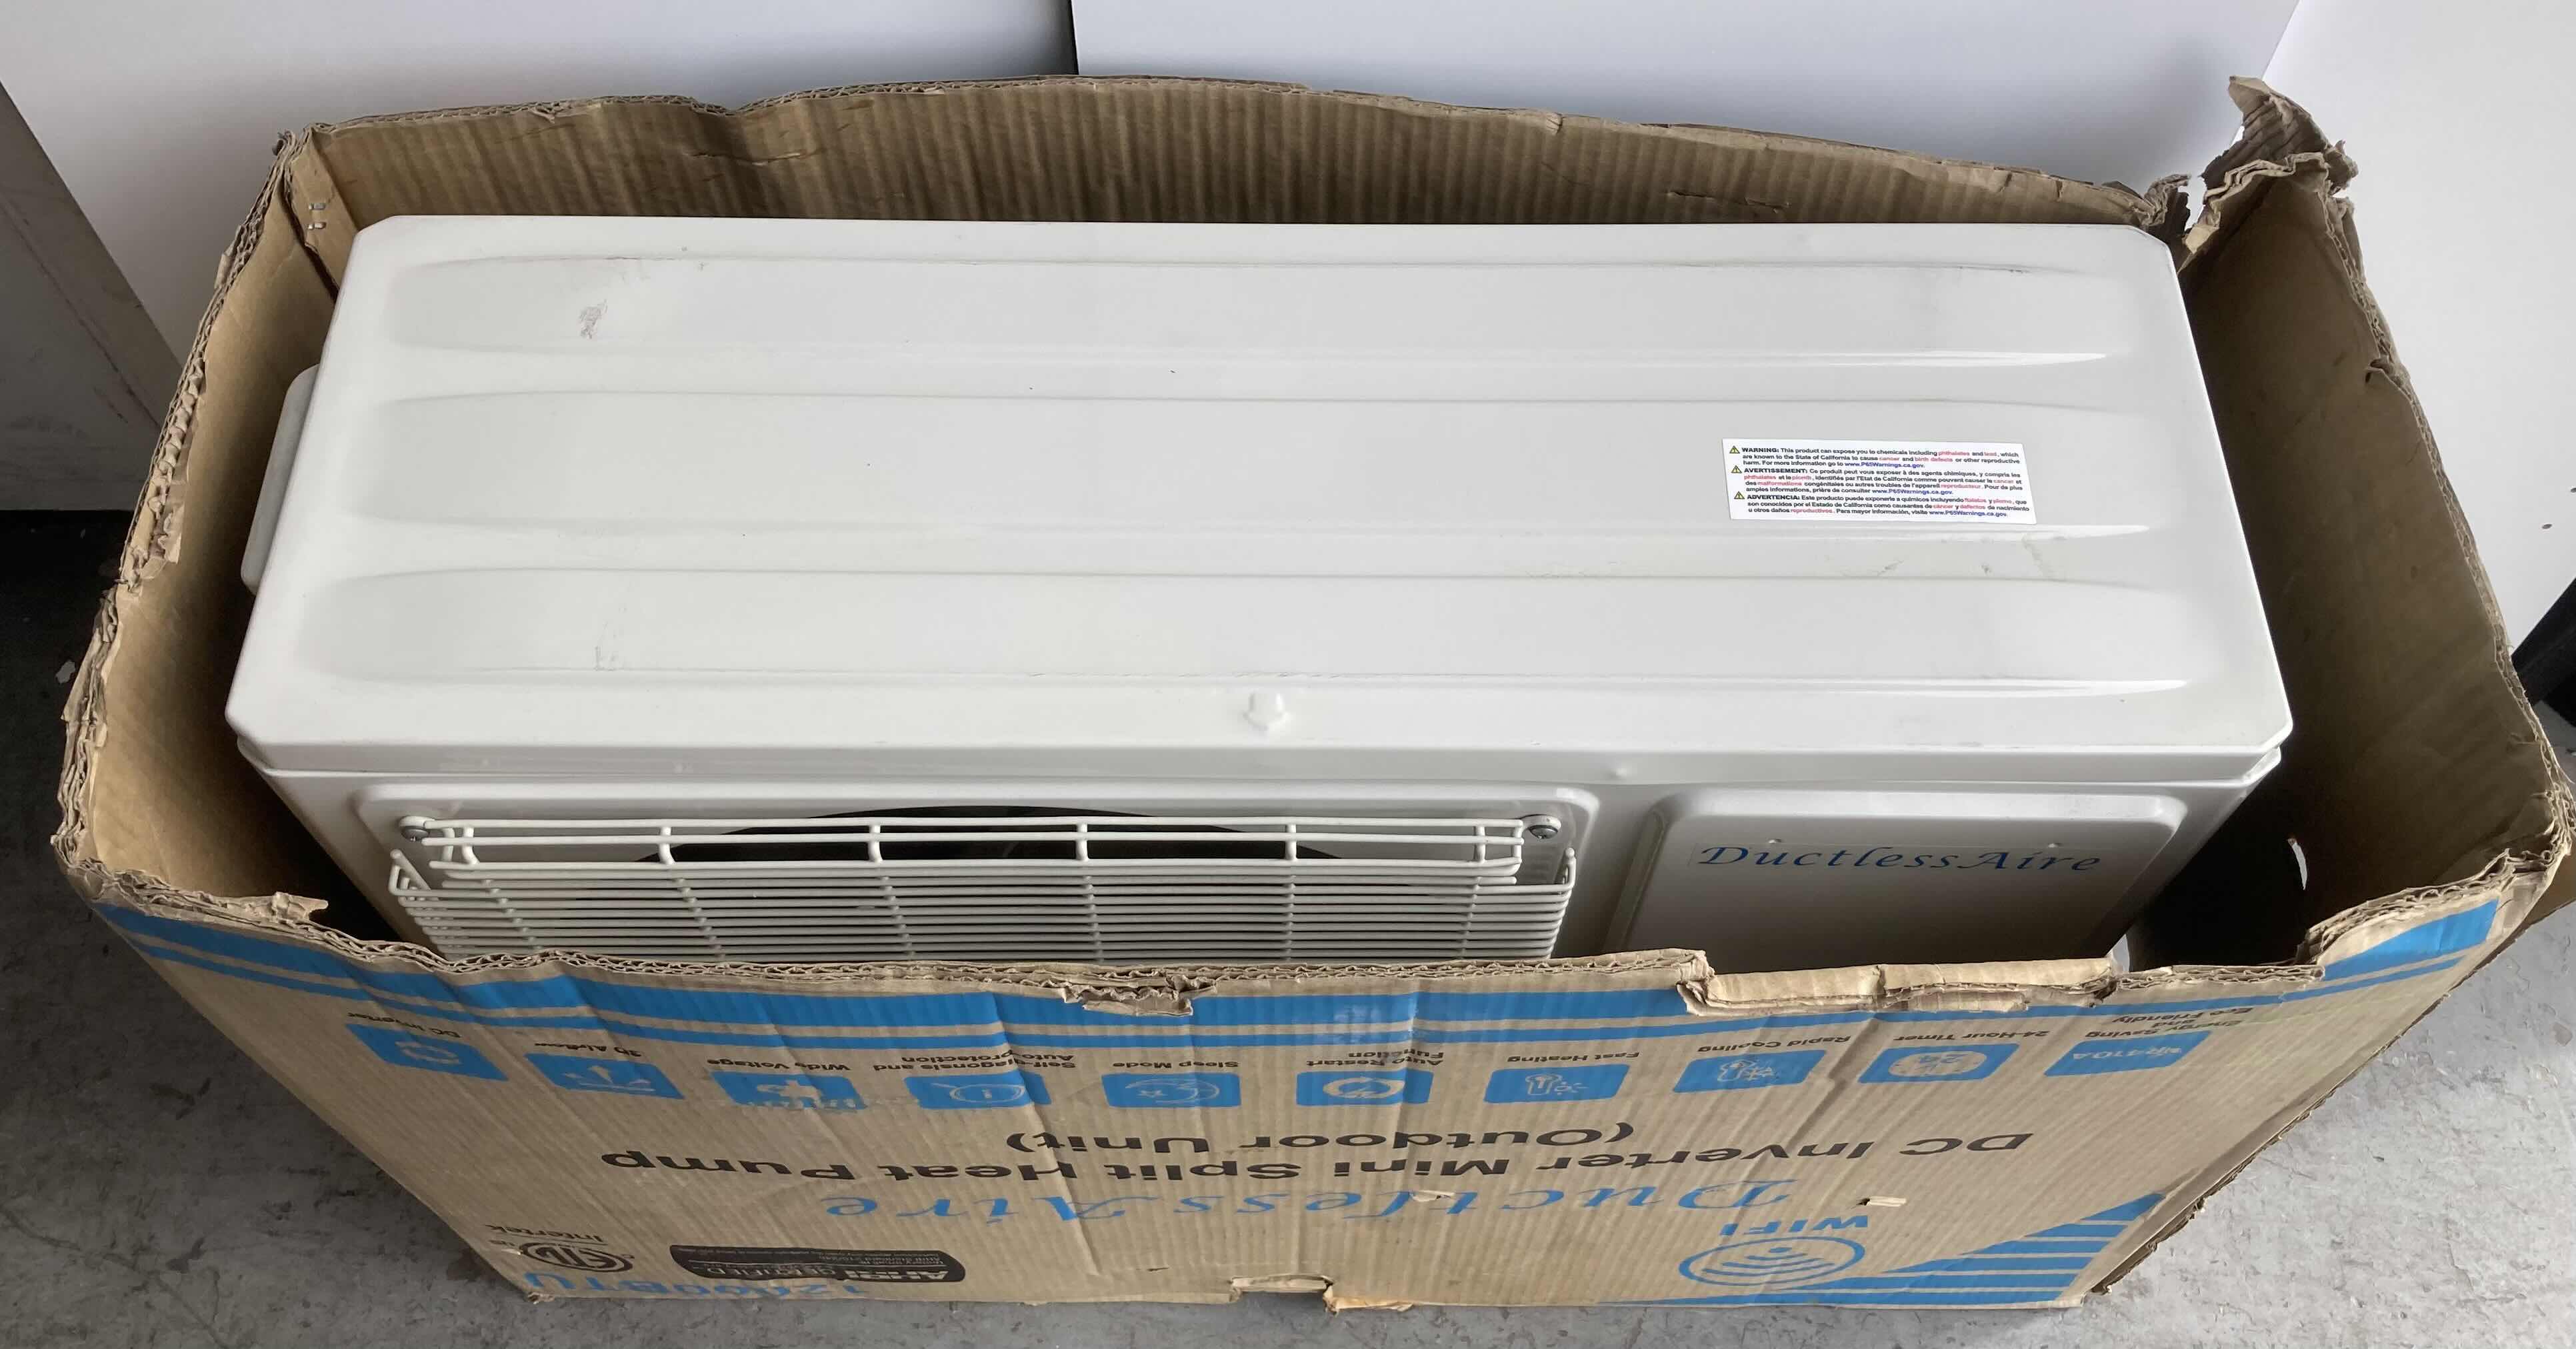 Photo 4 of DUCTLESS AIRE OUTDOOR DC INVERTER MINI SPLIT HEAT PUMP 12000BTU 208/230V 60HZ 1PH WIFI CONNECTION MODEL KA-1219-O (OUTDOOR UNIT ONLY)